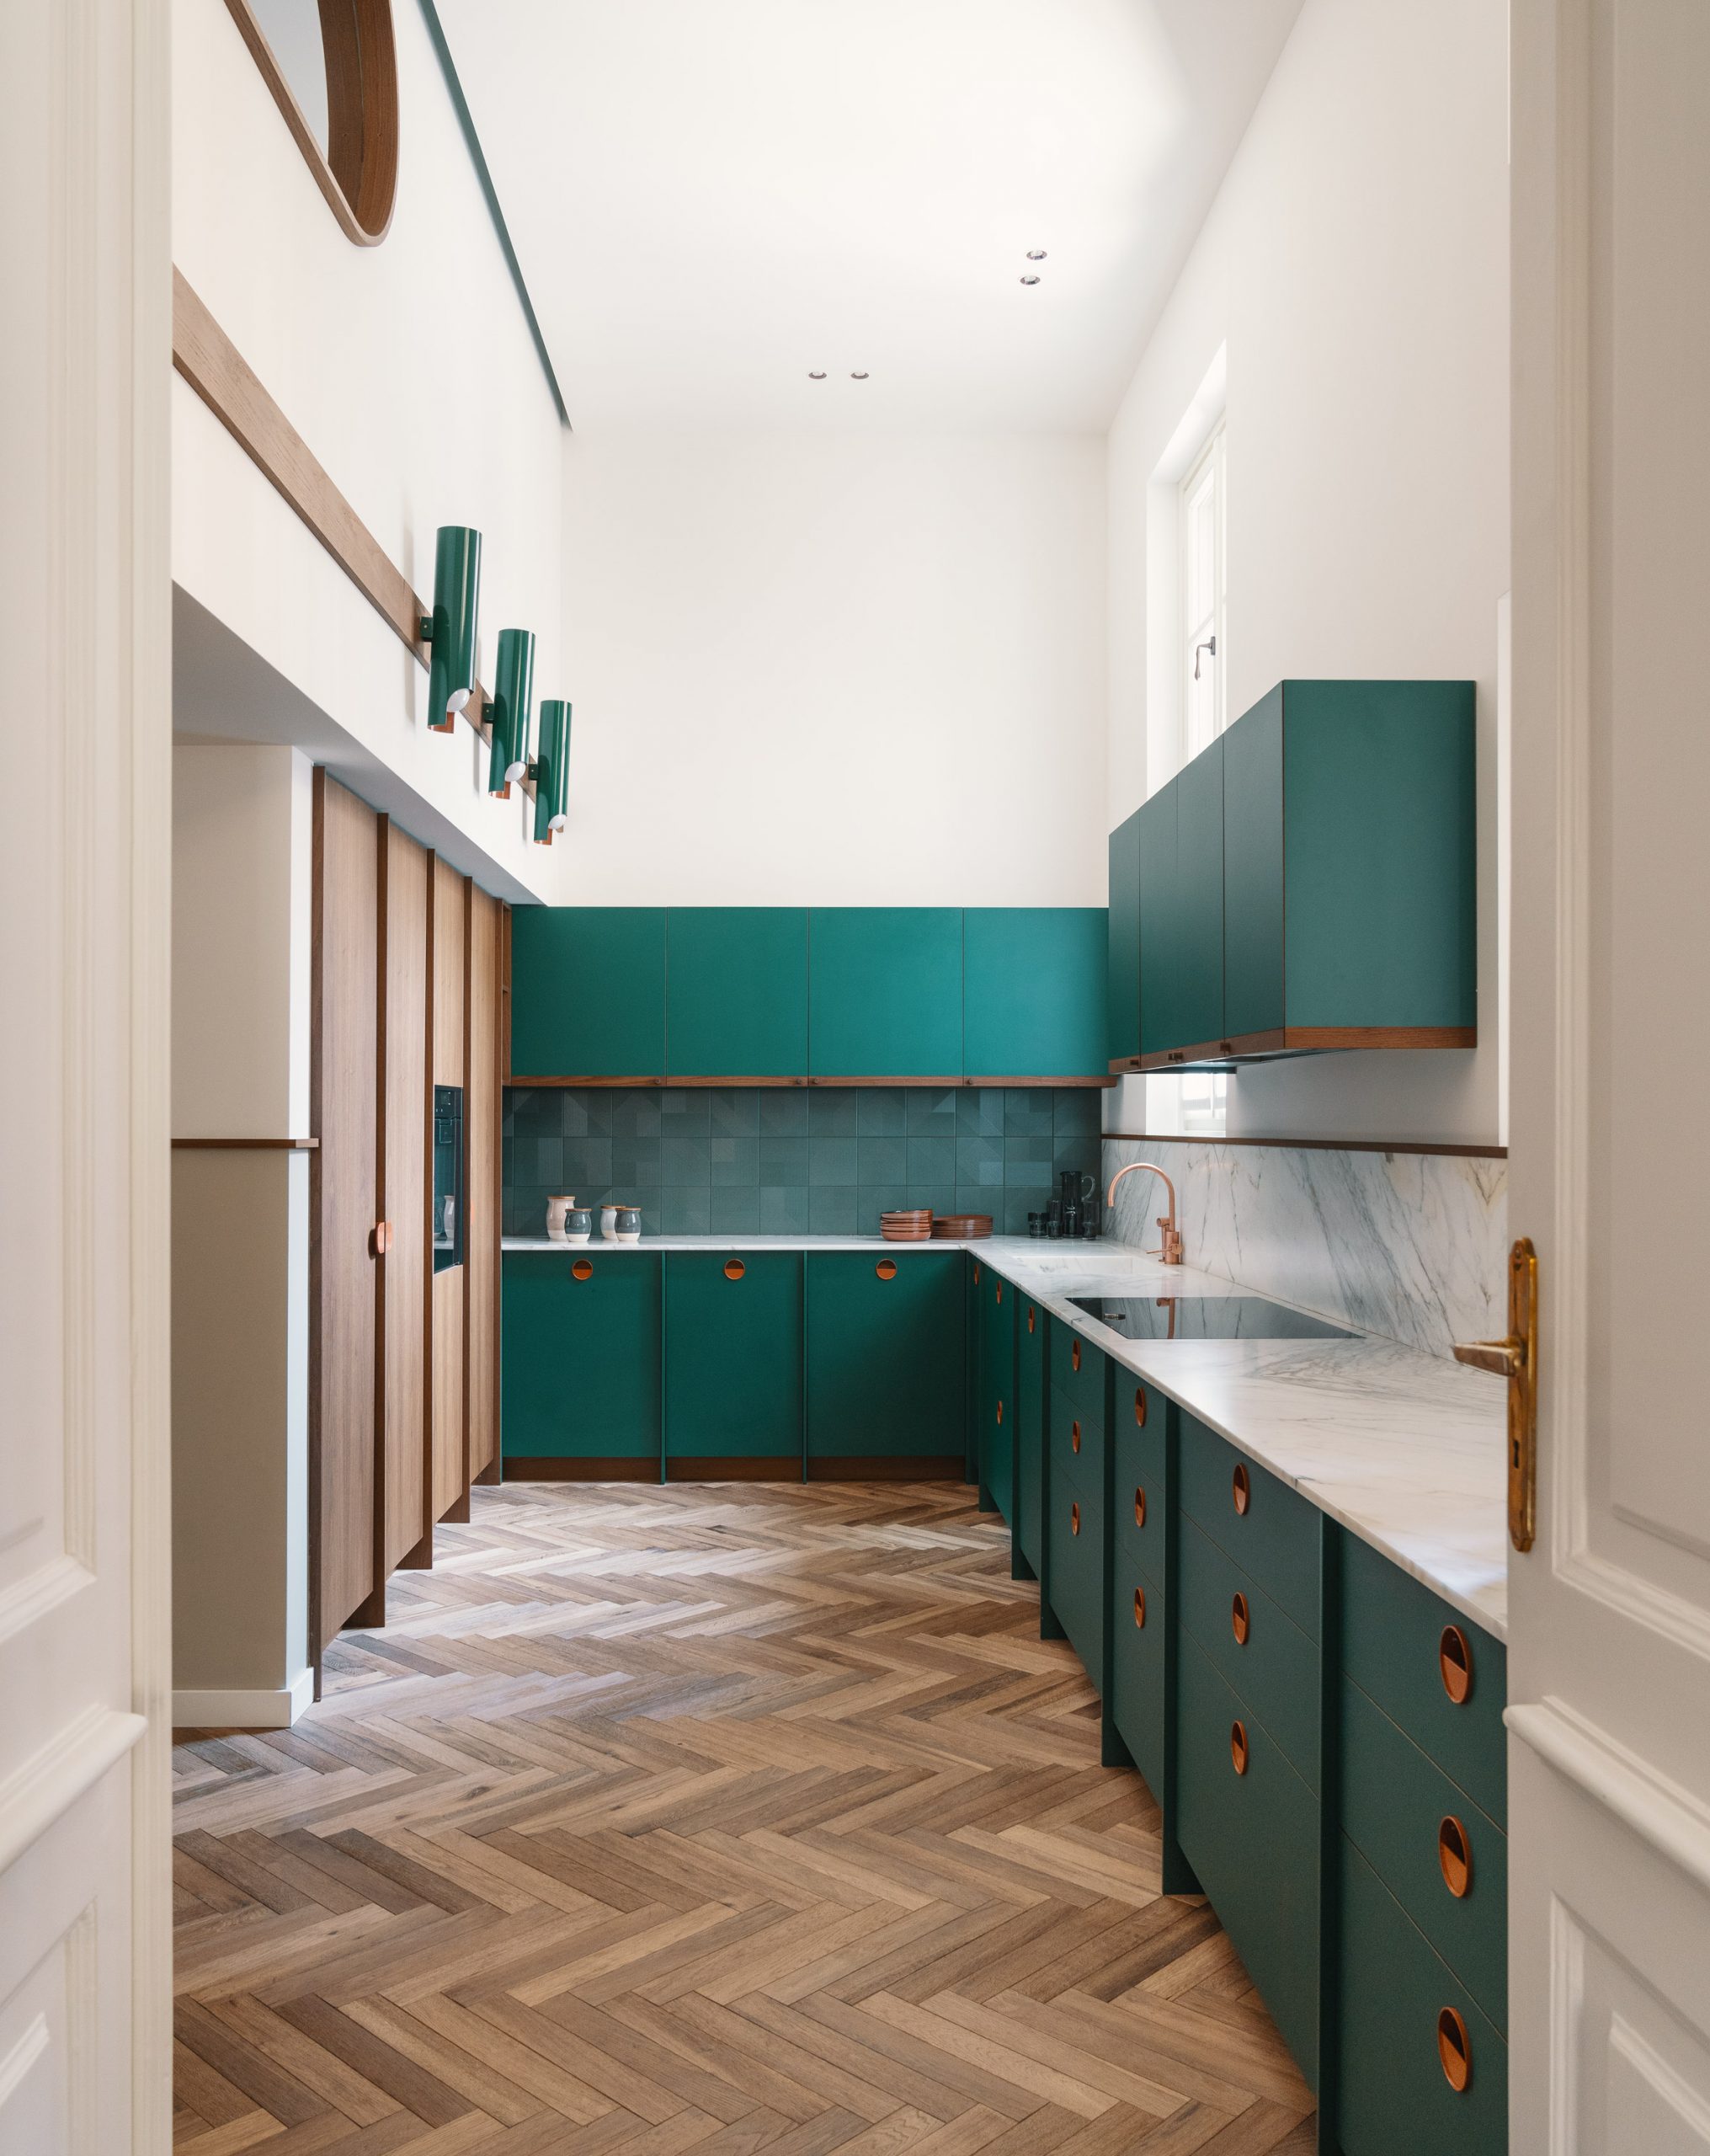 Teal kitchen counter with copper handles